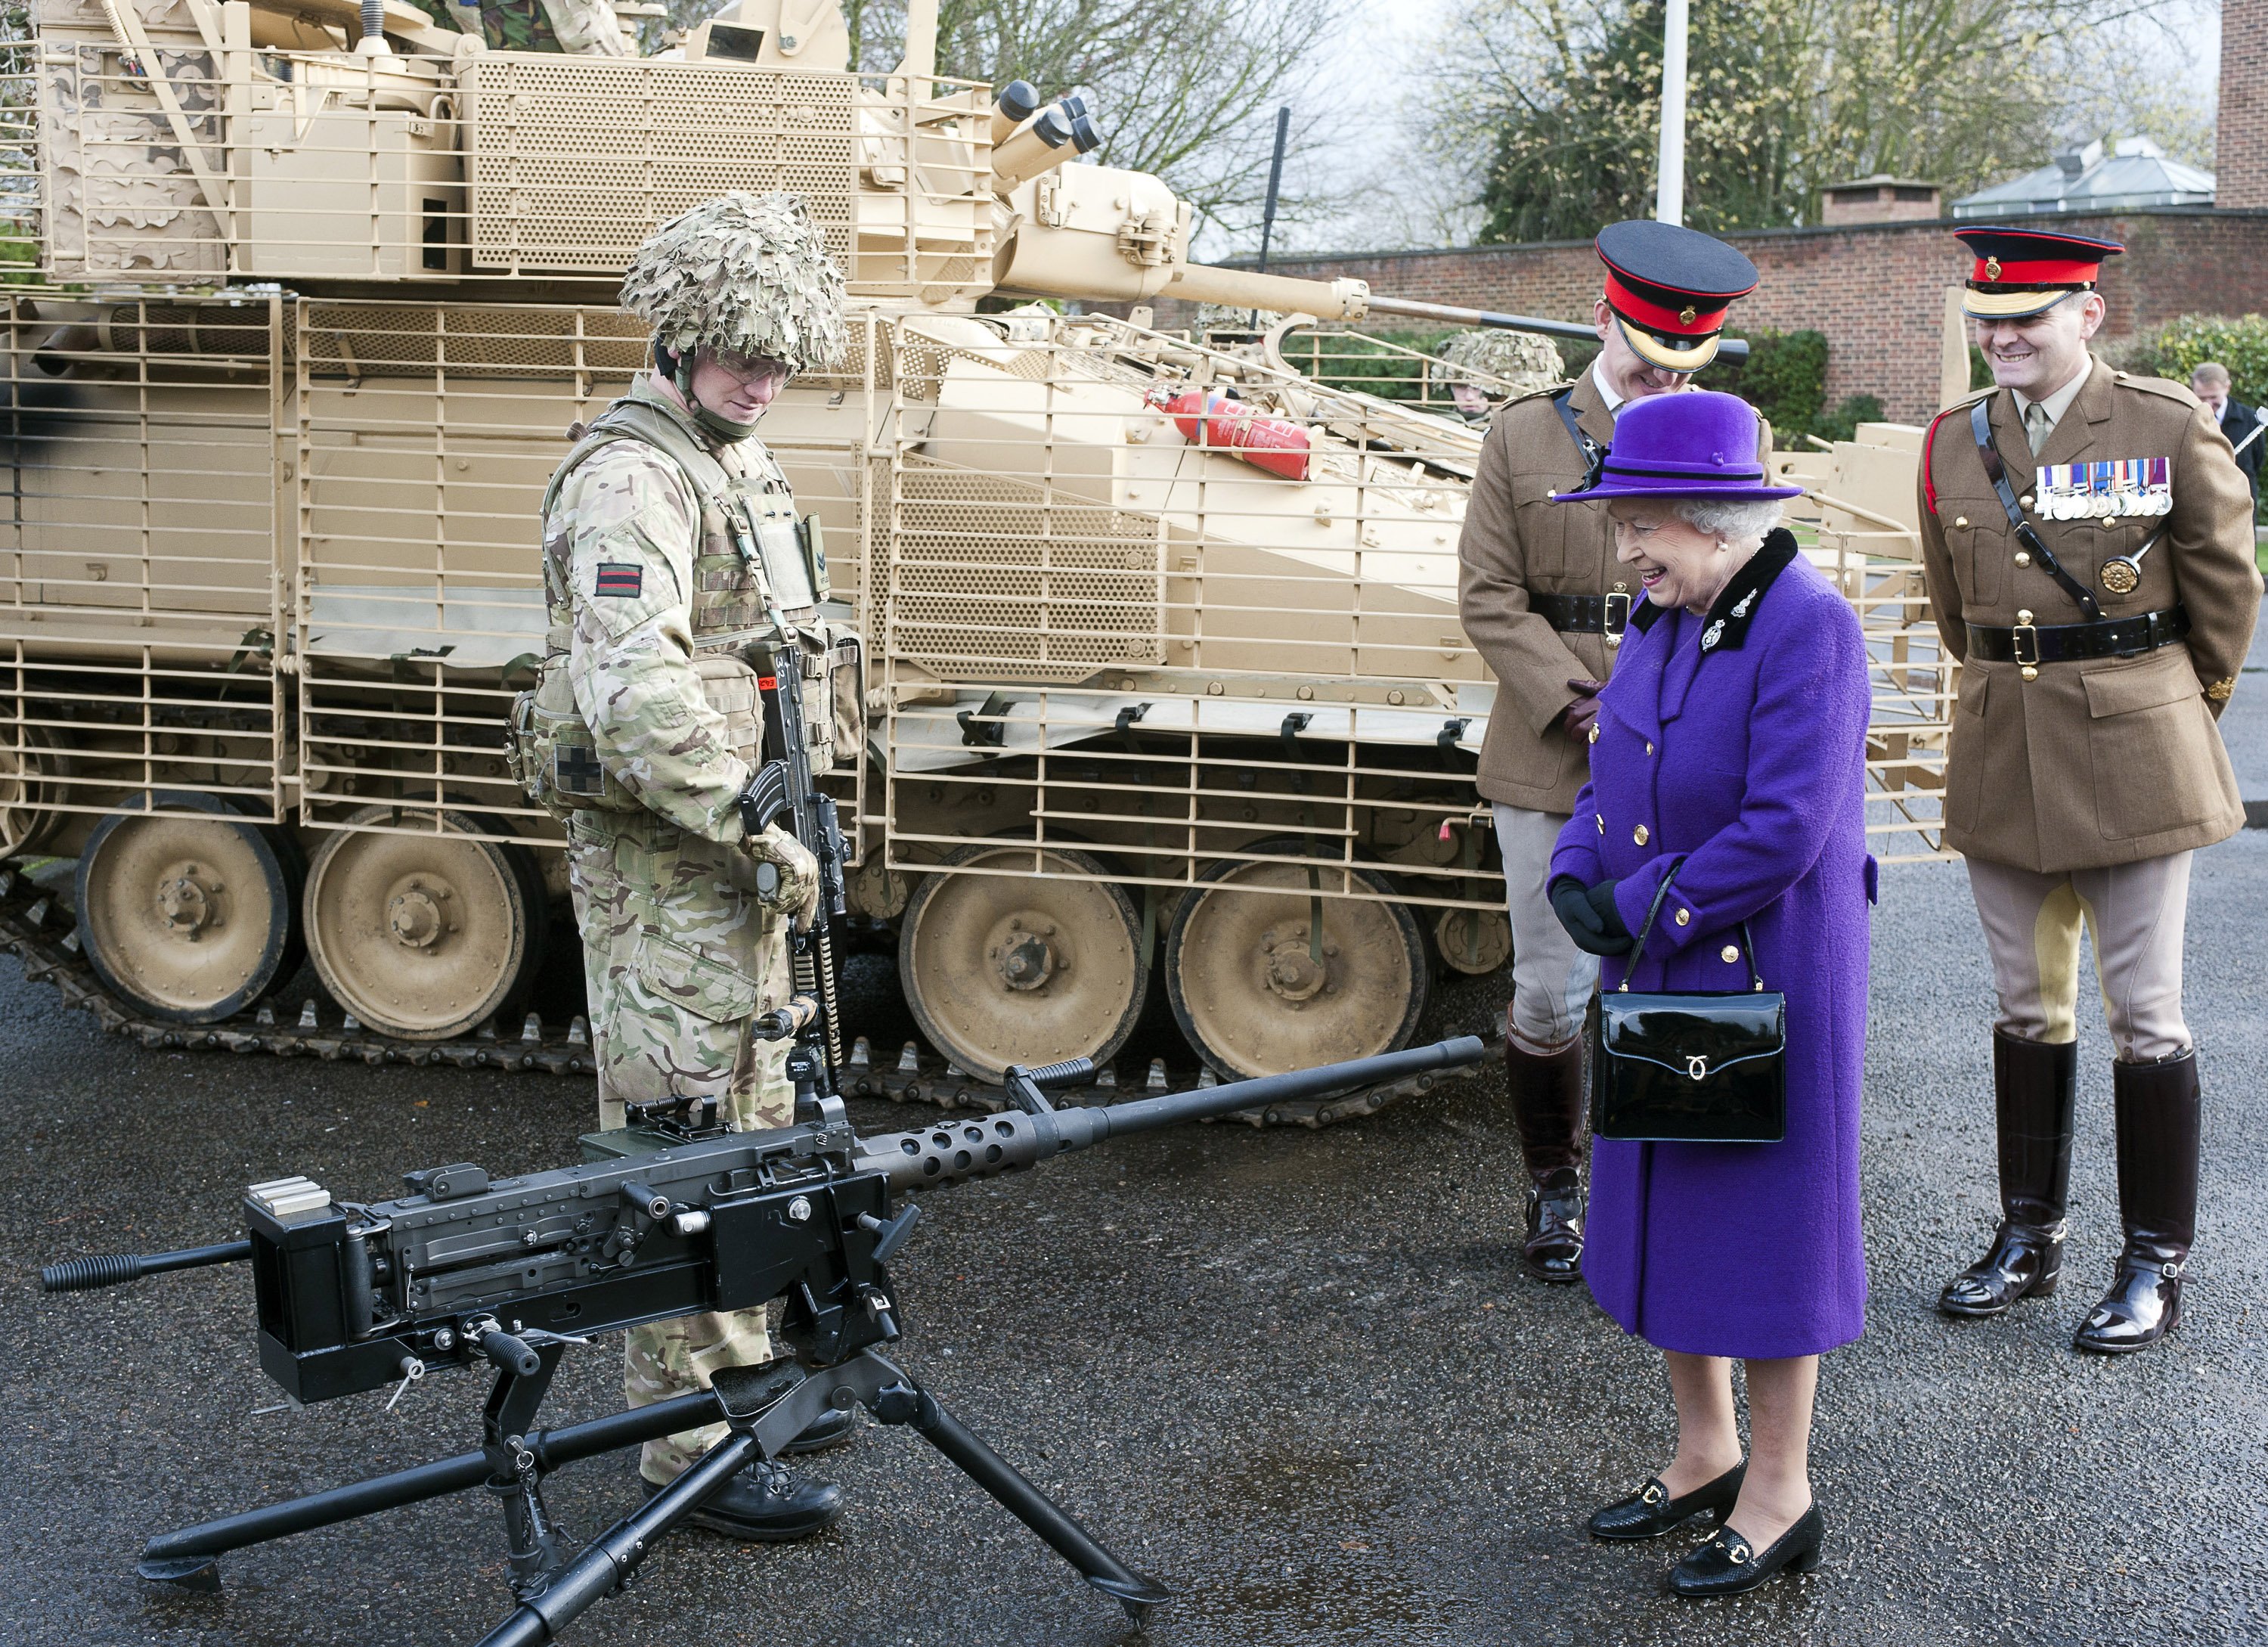 Queen Elizabeth II looks at a machine gun as she meets members of the Household Cavalry at Combermere Barracks on November 26, 2012 in Windsor, England. (Photo by David Parker - WPA Pool/Getty Images)